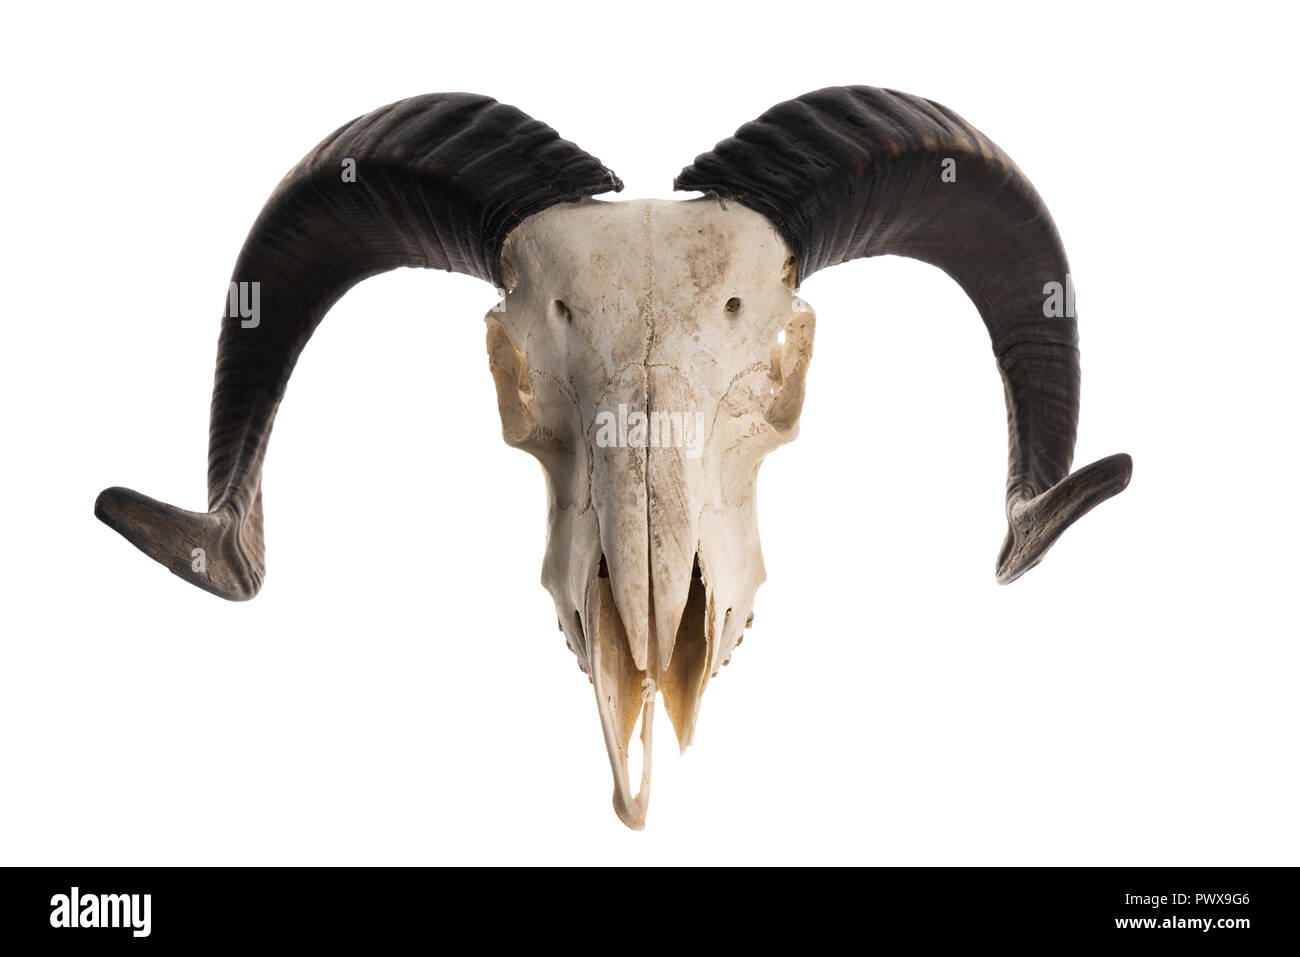 Studio shot of a ram skull with horns, isolated on white background Stock Photo